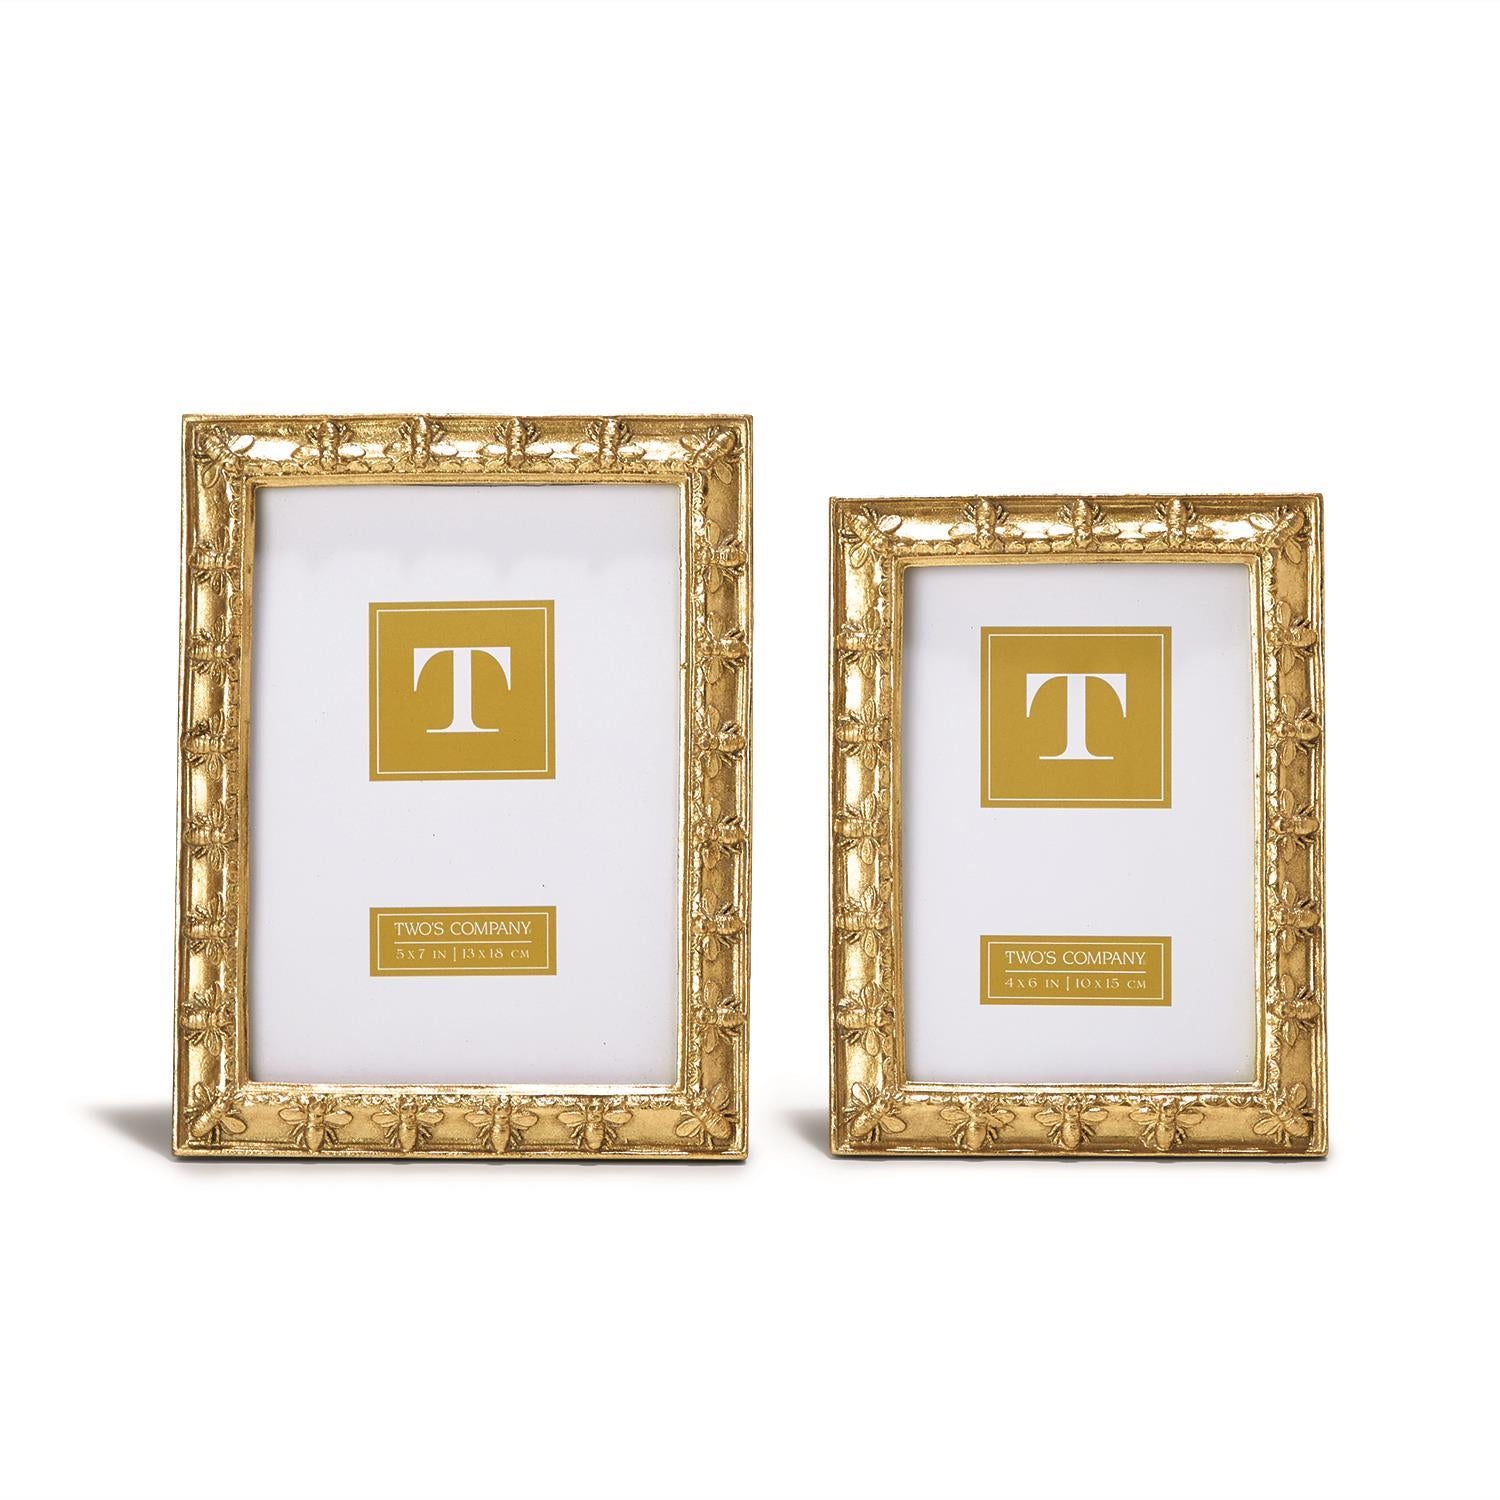 Two's Company Bee-utiful Photo Frames (includes 2 Sizes: 4 x 6 and 5 x 7)